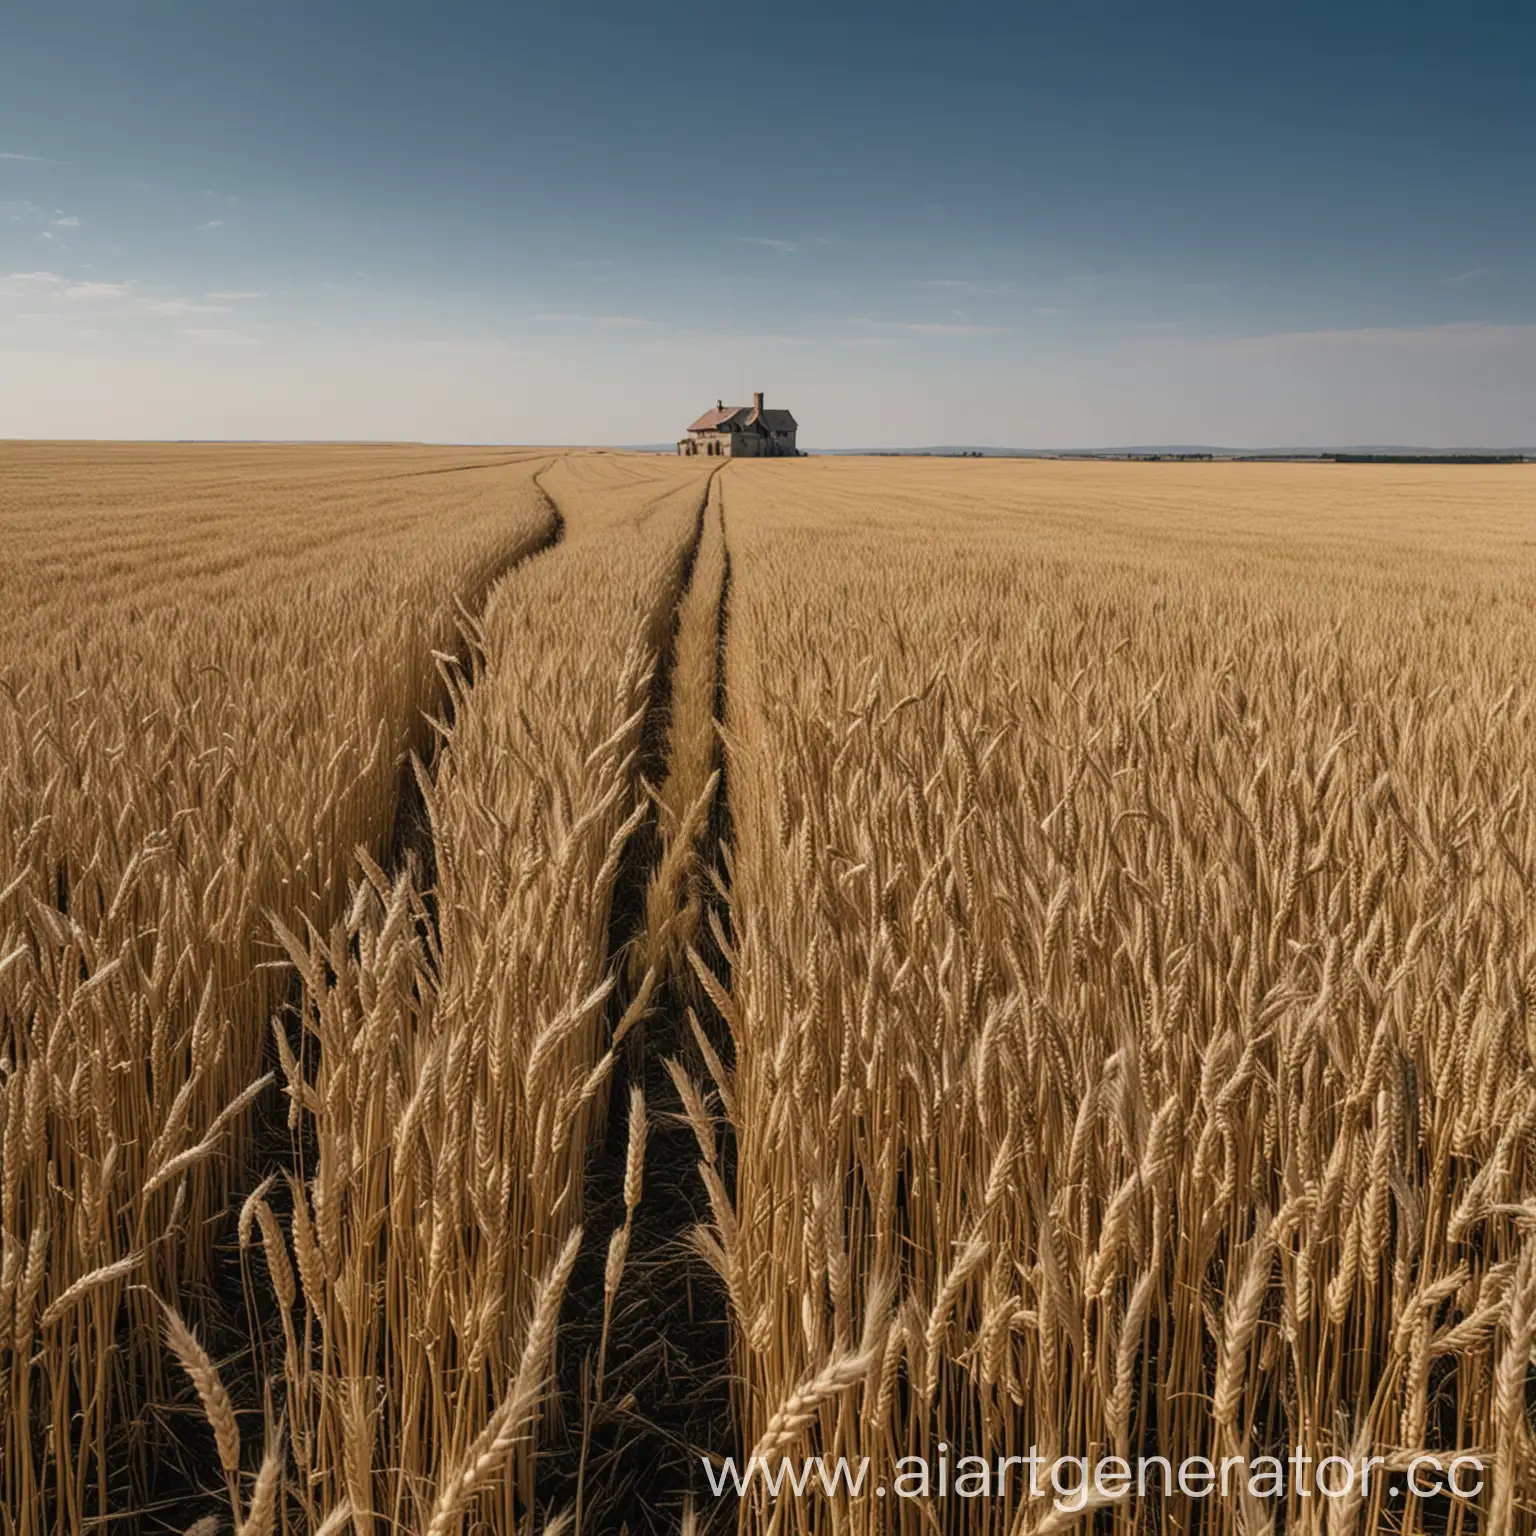 Endless fields of wheat, the horizon line in the middle of the image, the horizon is not visible, blue sky, midday, a lonely country house stands on the edge